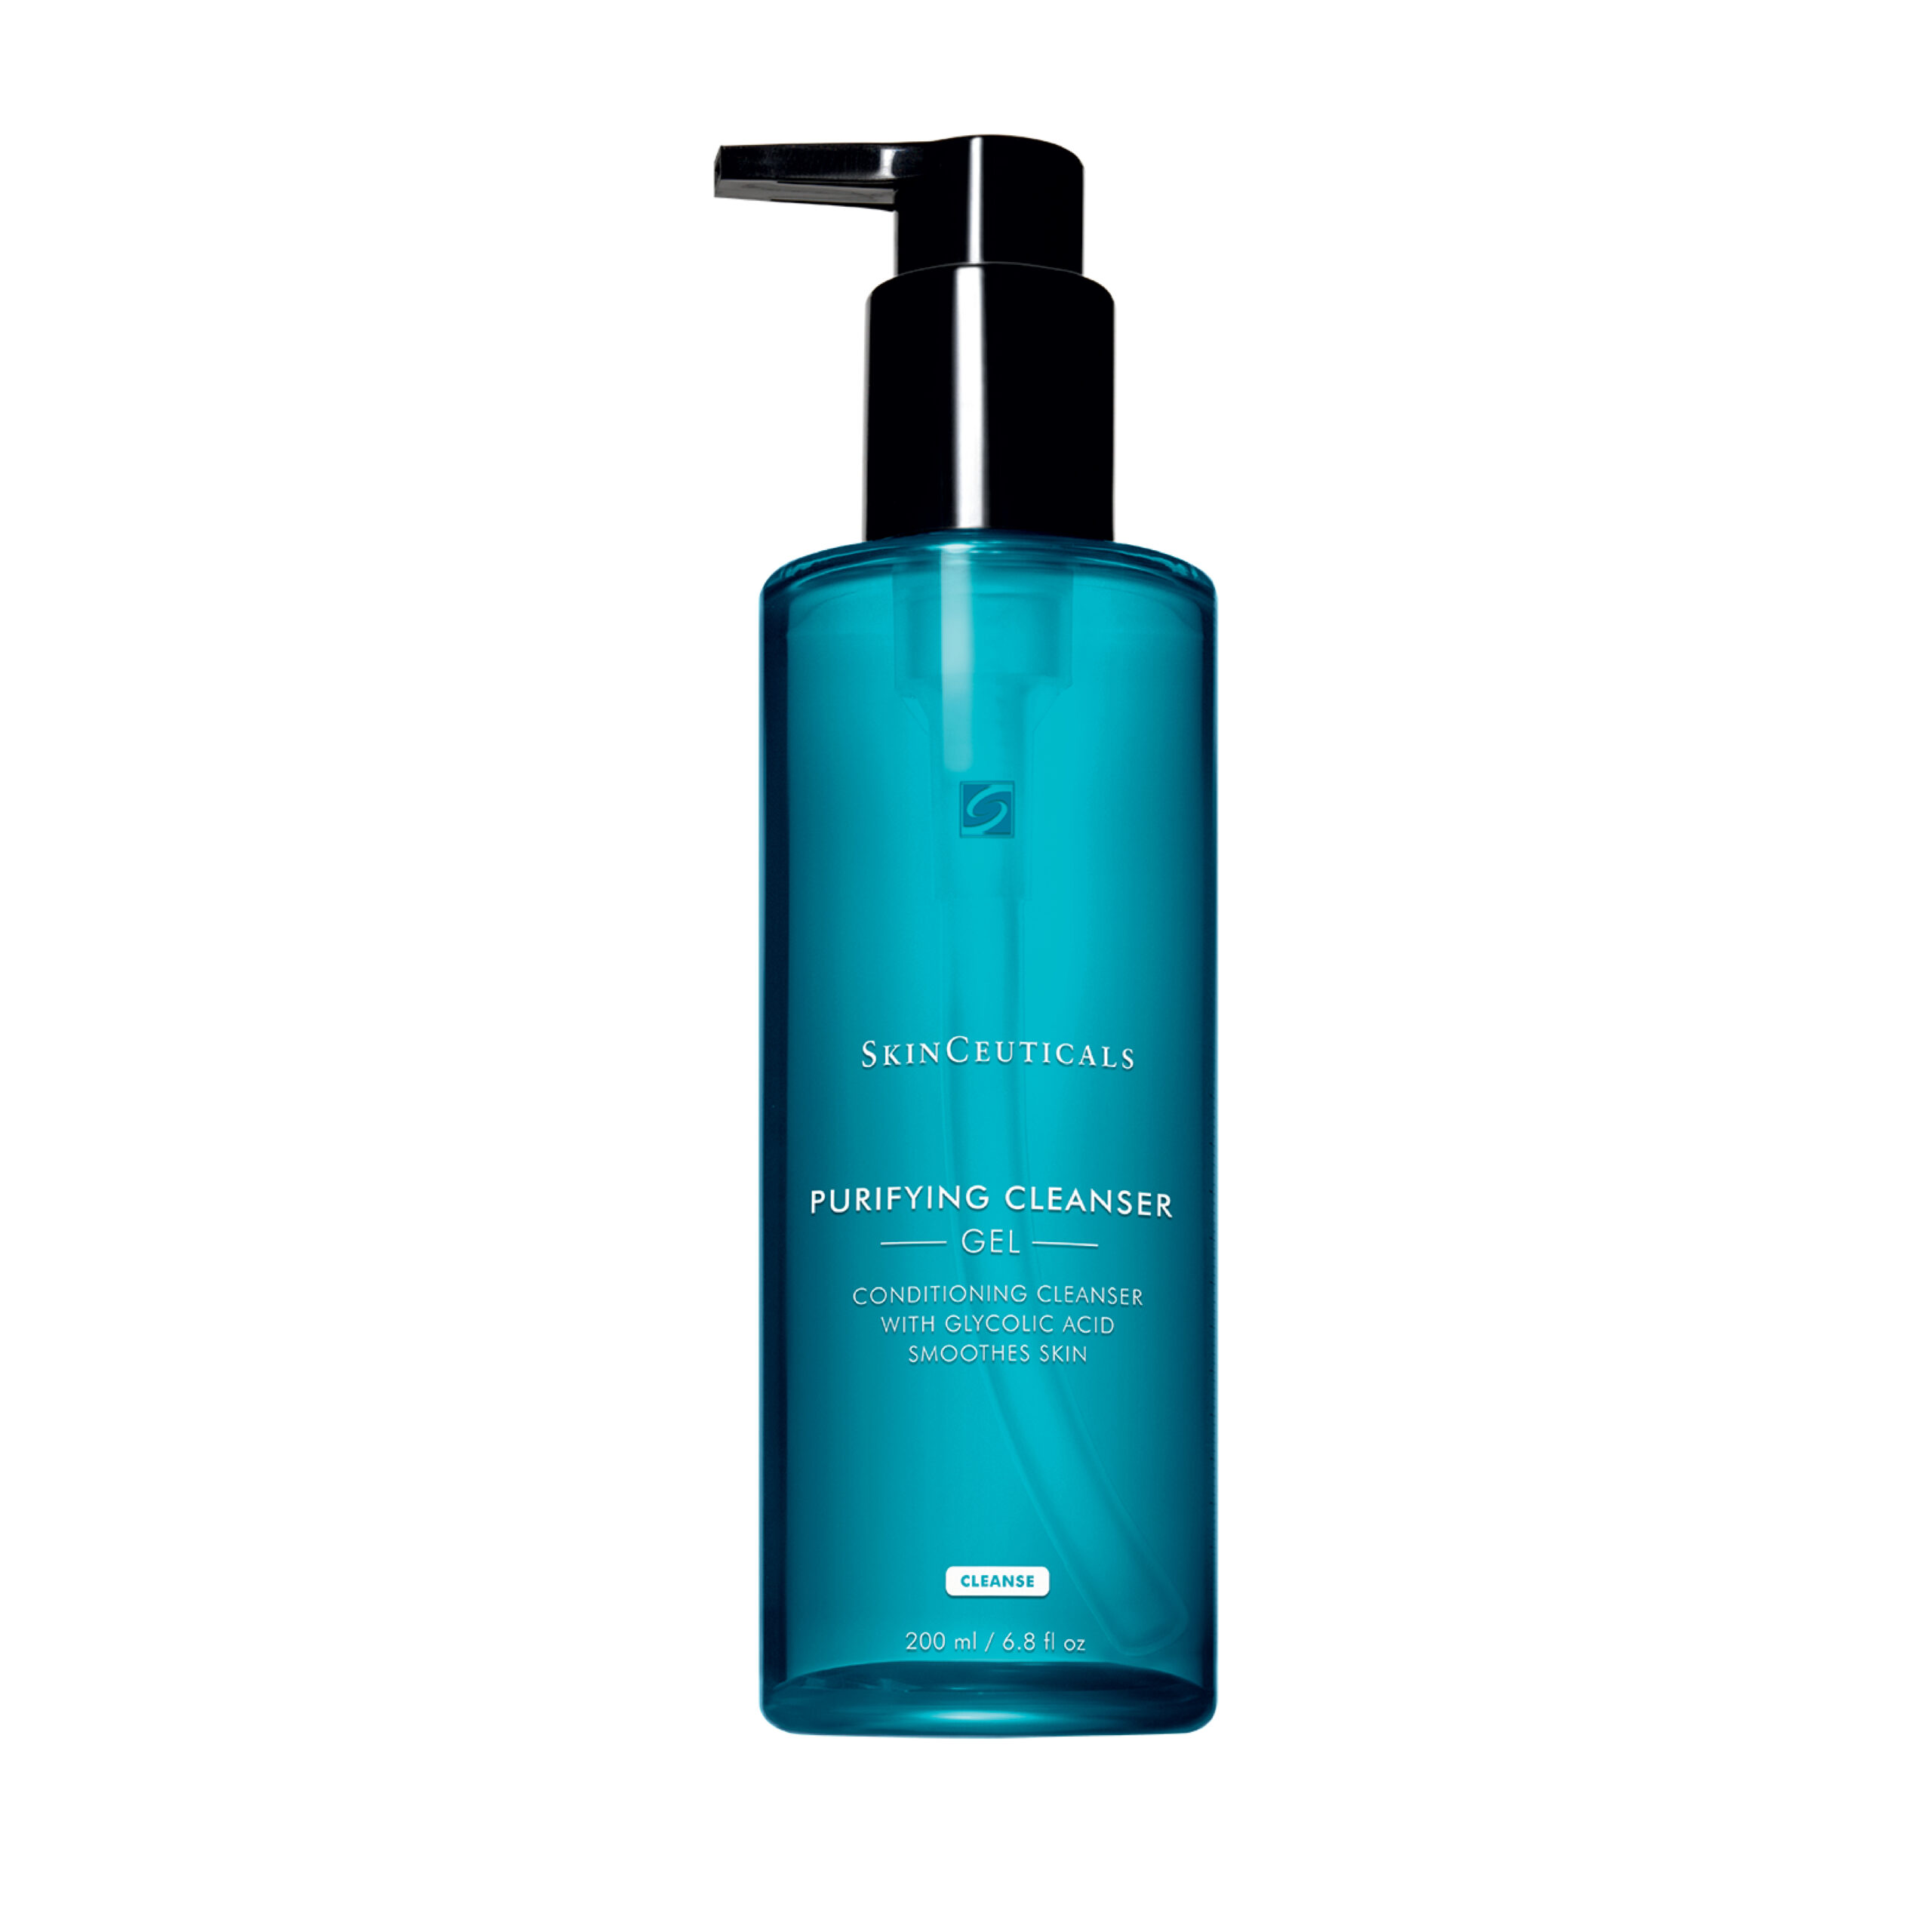 NMD SHOP SkinCeuticals Purifying Cleanser